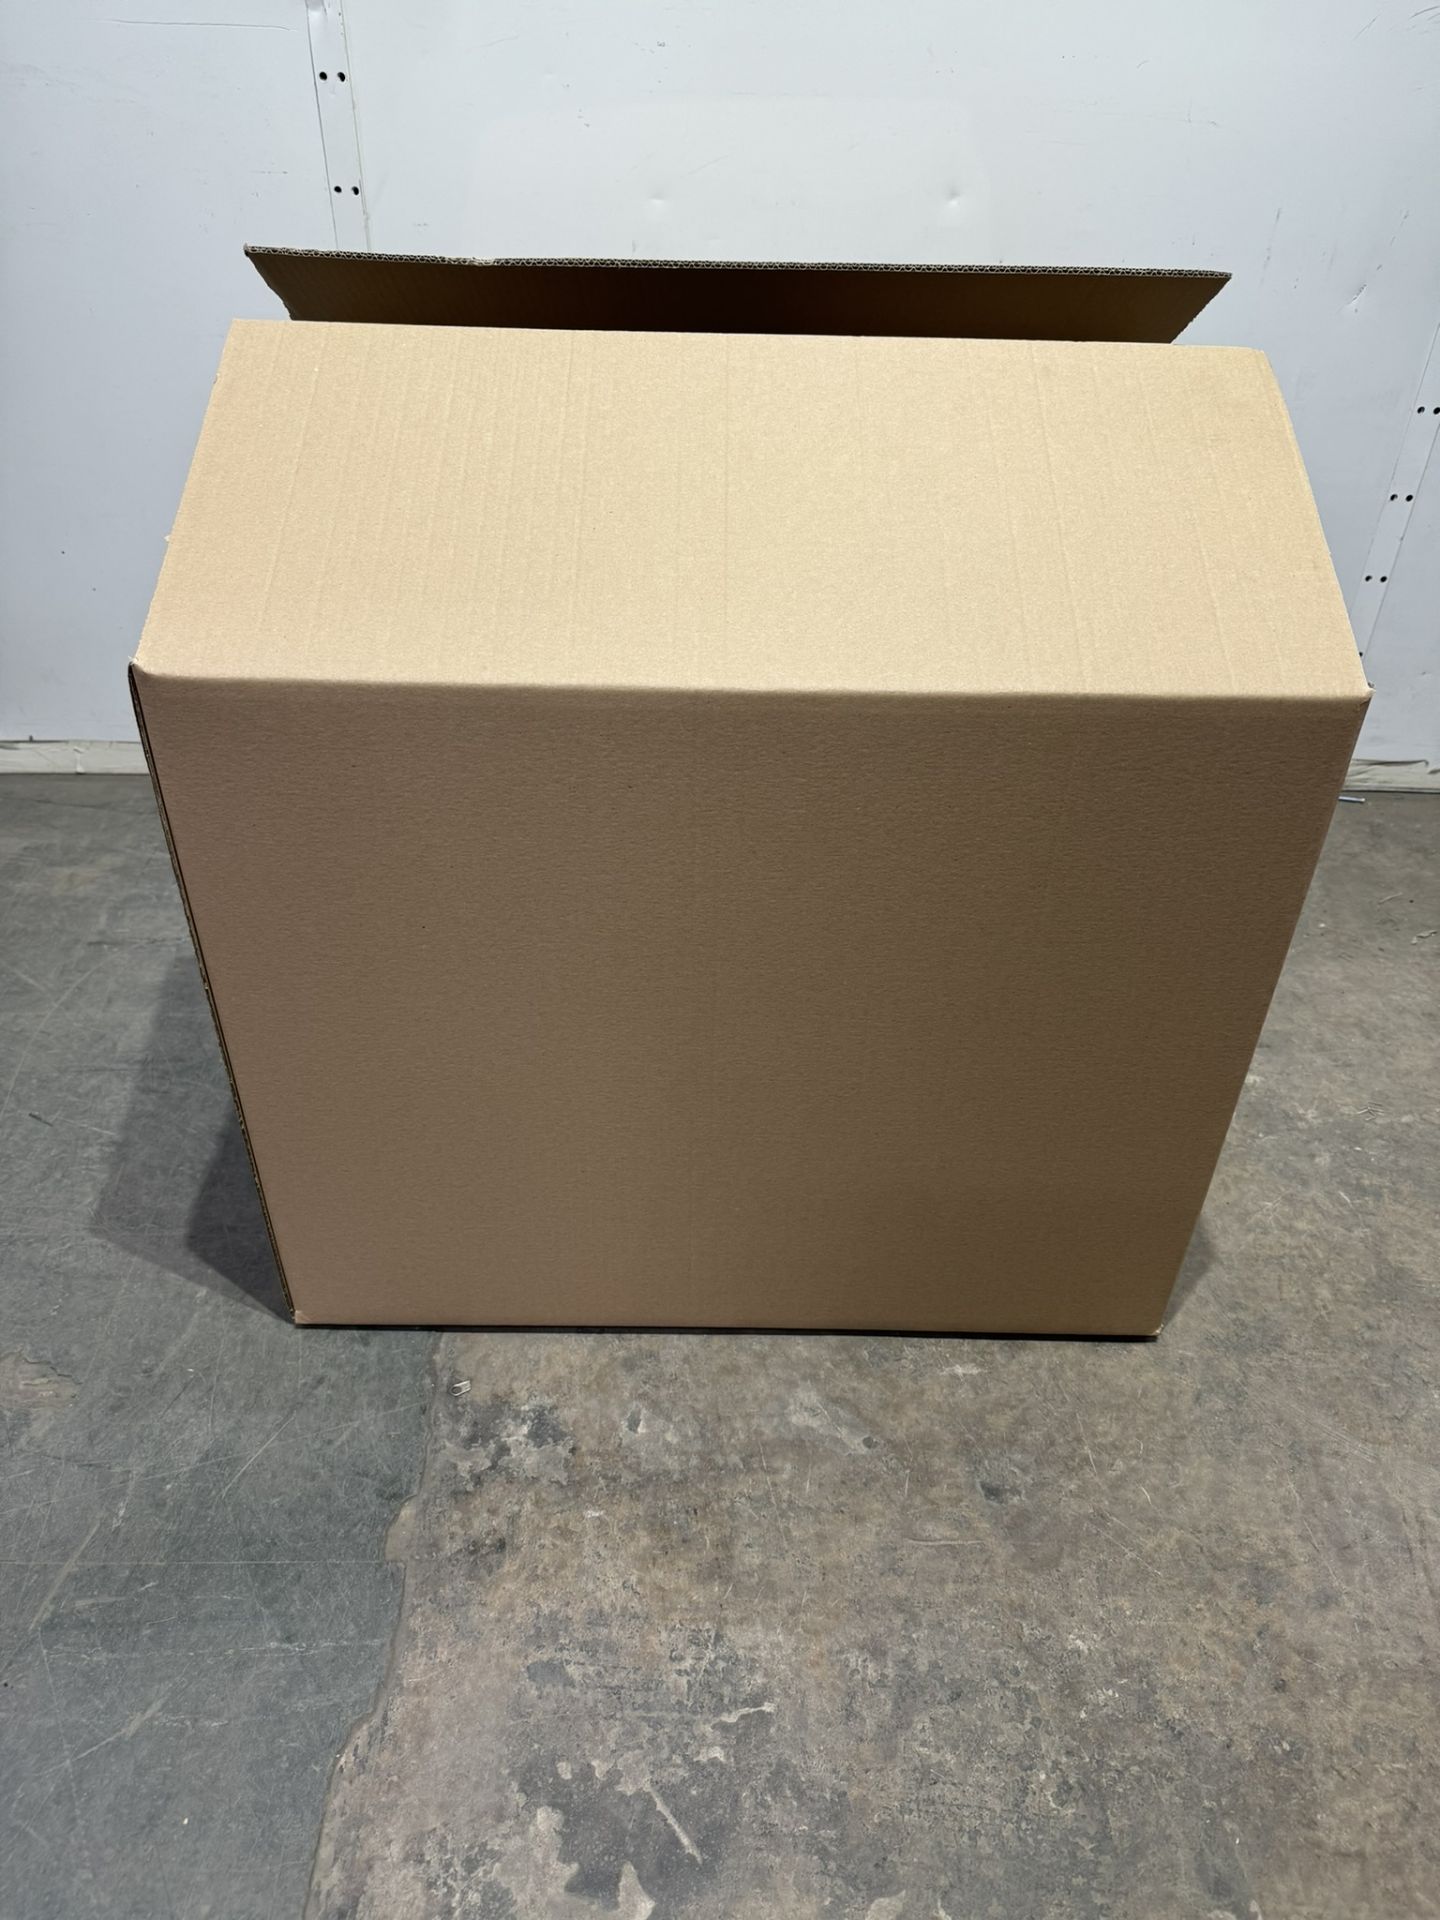 150 x Unbranded Double Wall Cardboard Boxes | 60 x 60 x 70CM